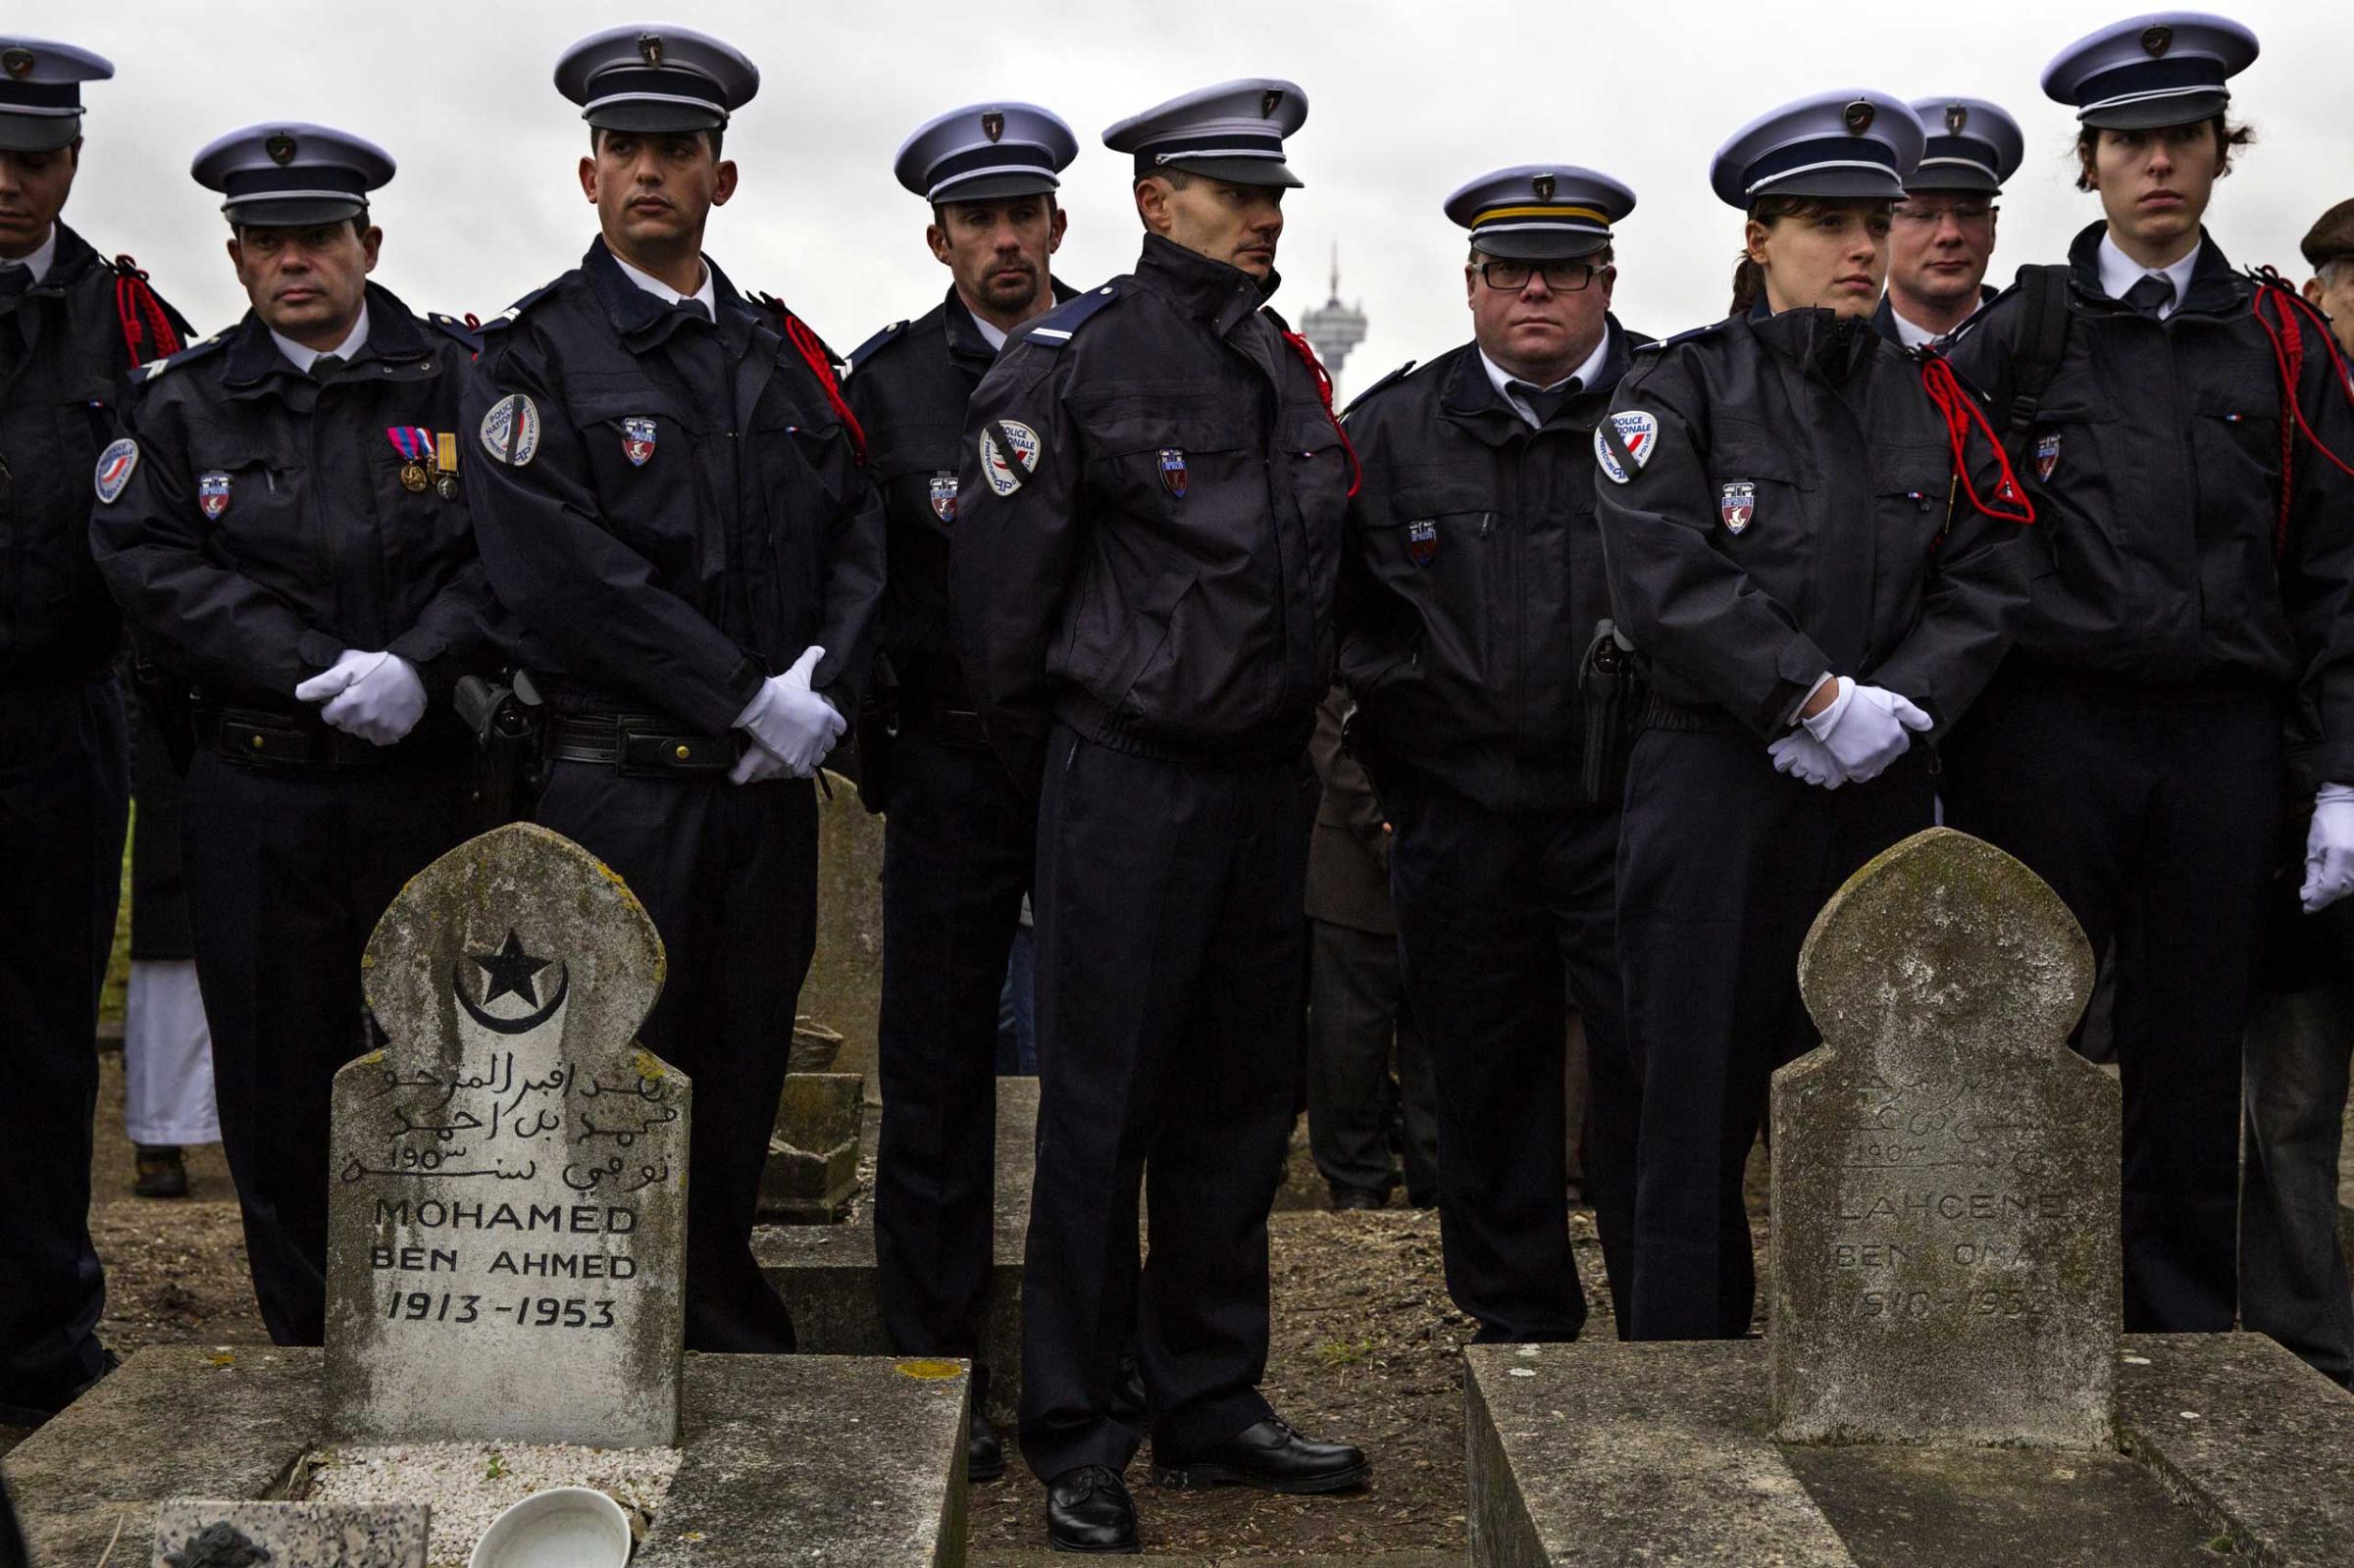 Police Officers line up at the funeral of murdered police officer Ahmed Merabet during the burial at a muslim cemetery on Jan. 13, 2015 in Bobigny, France.